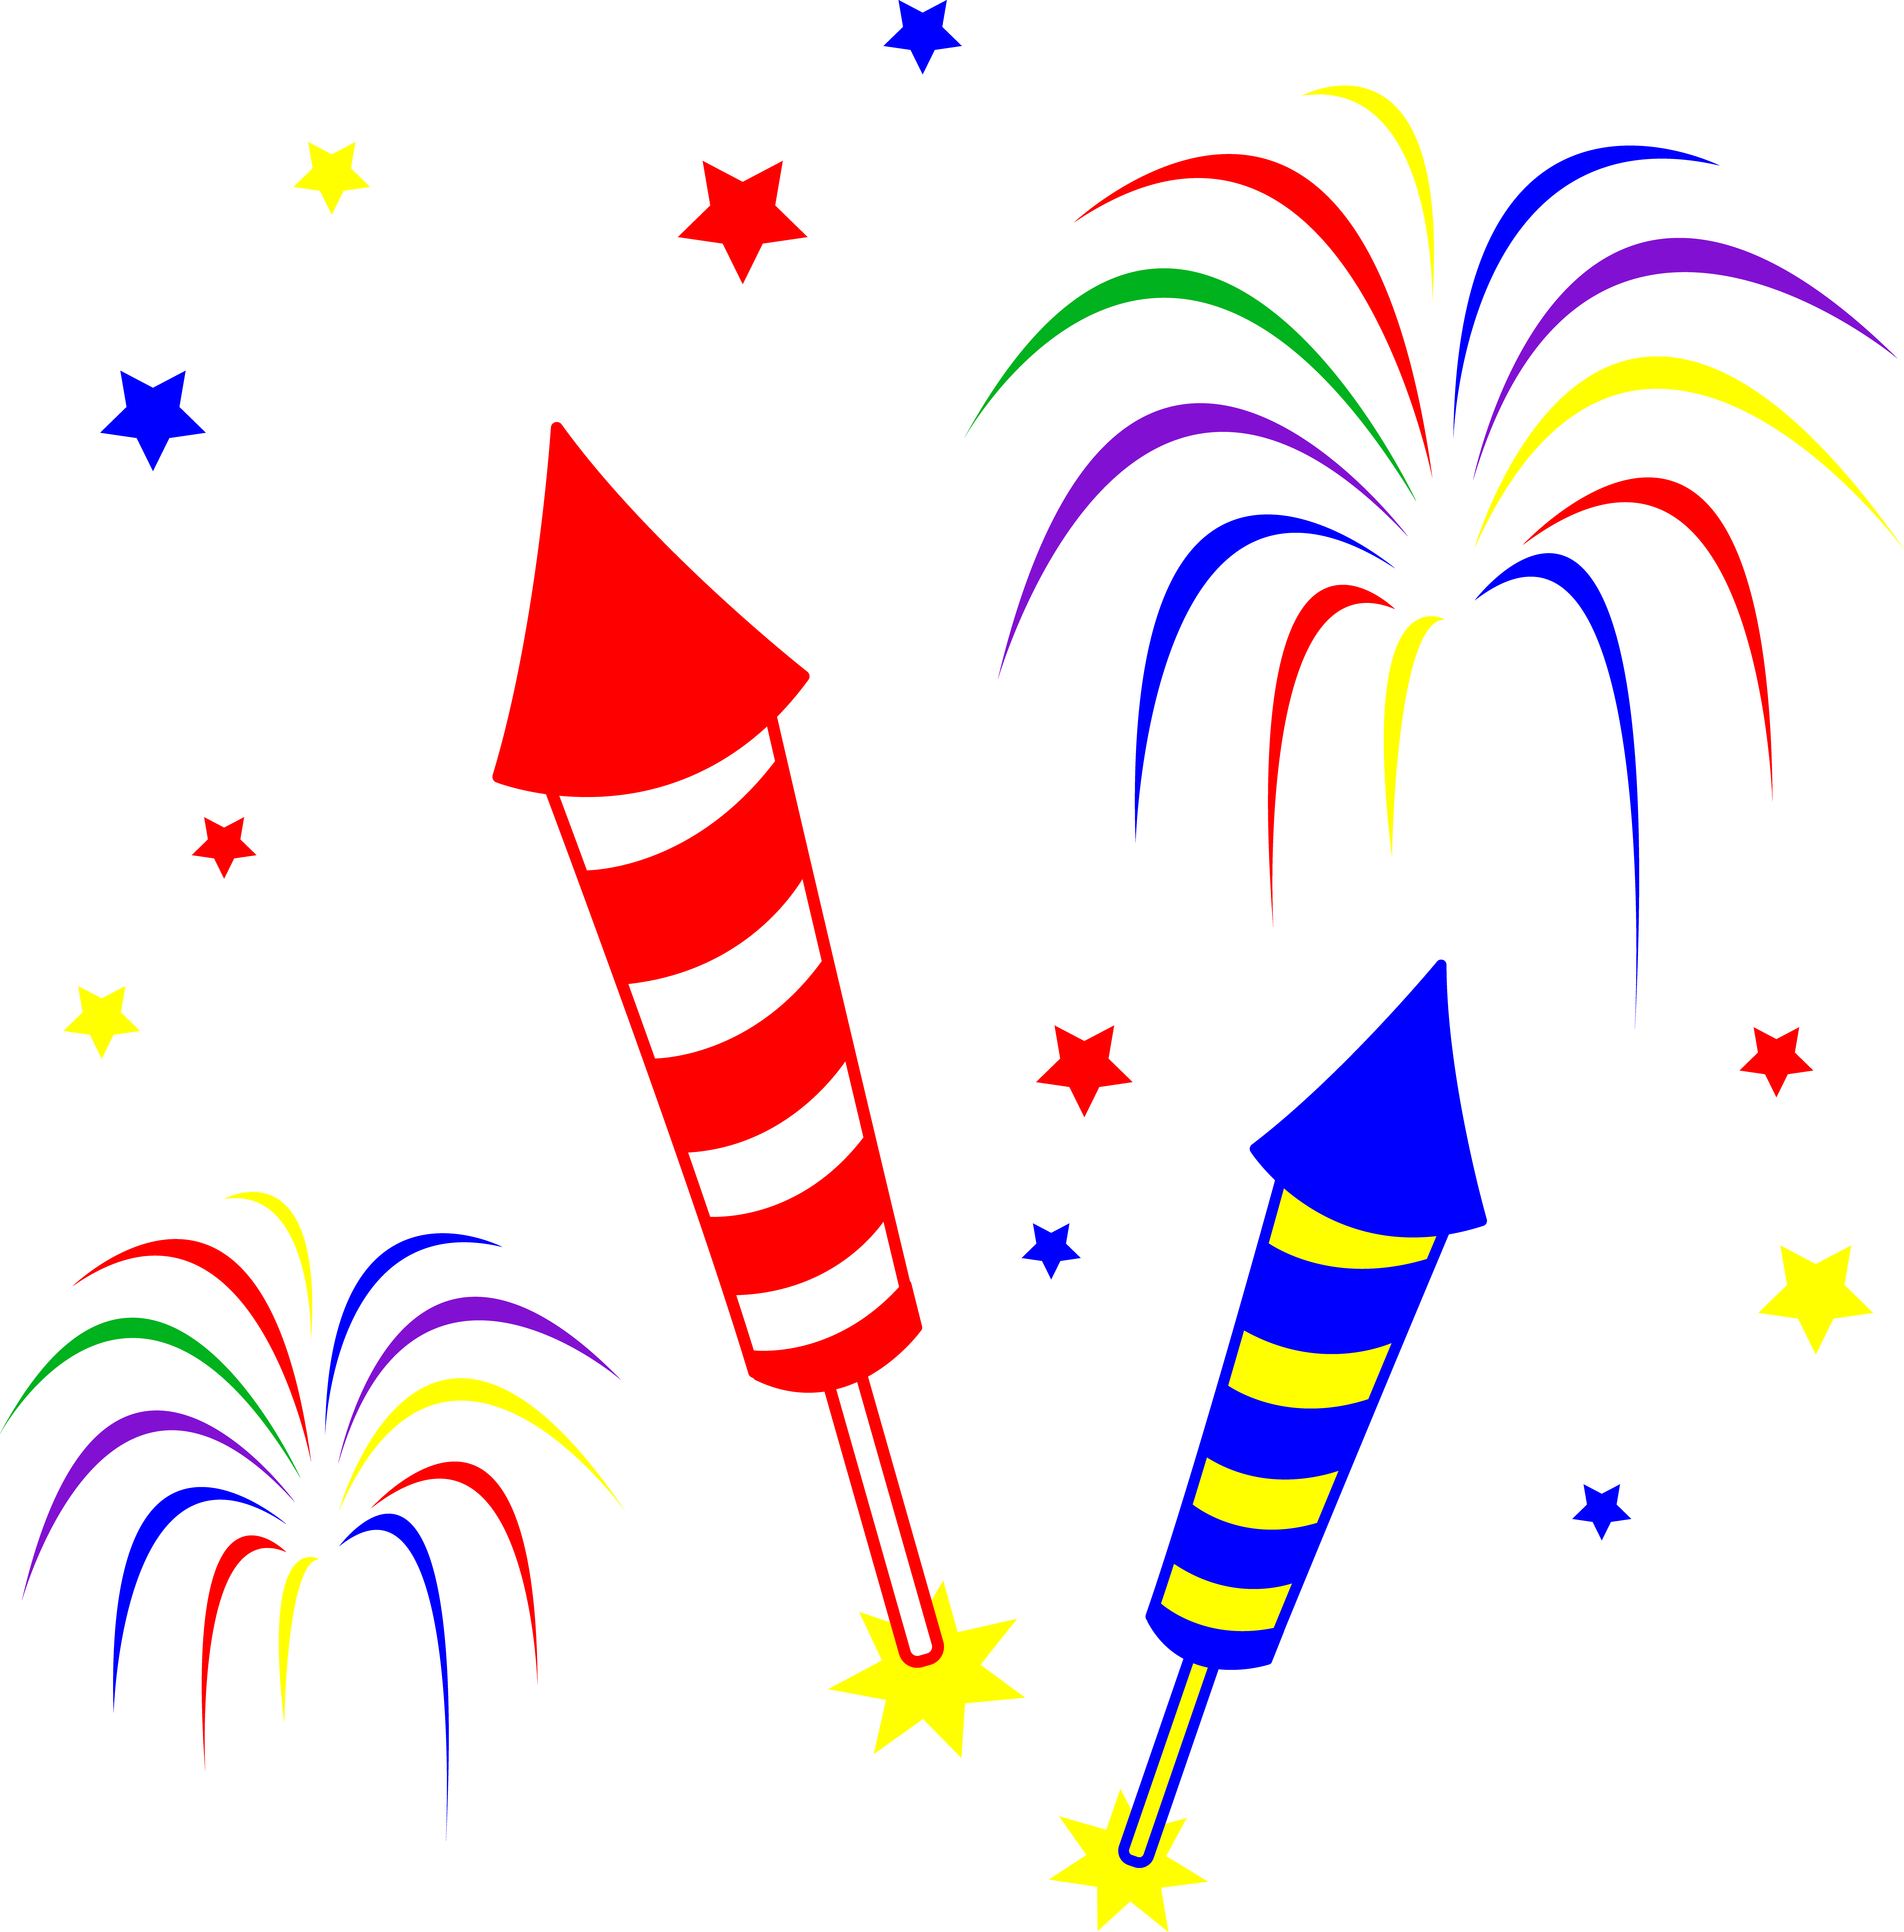 clipart fireworks fire works